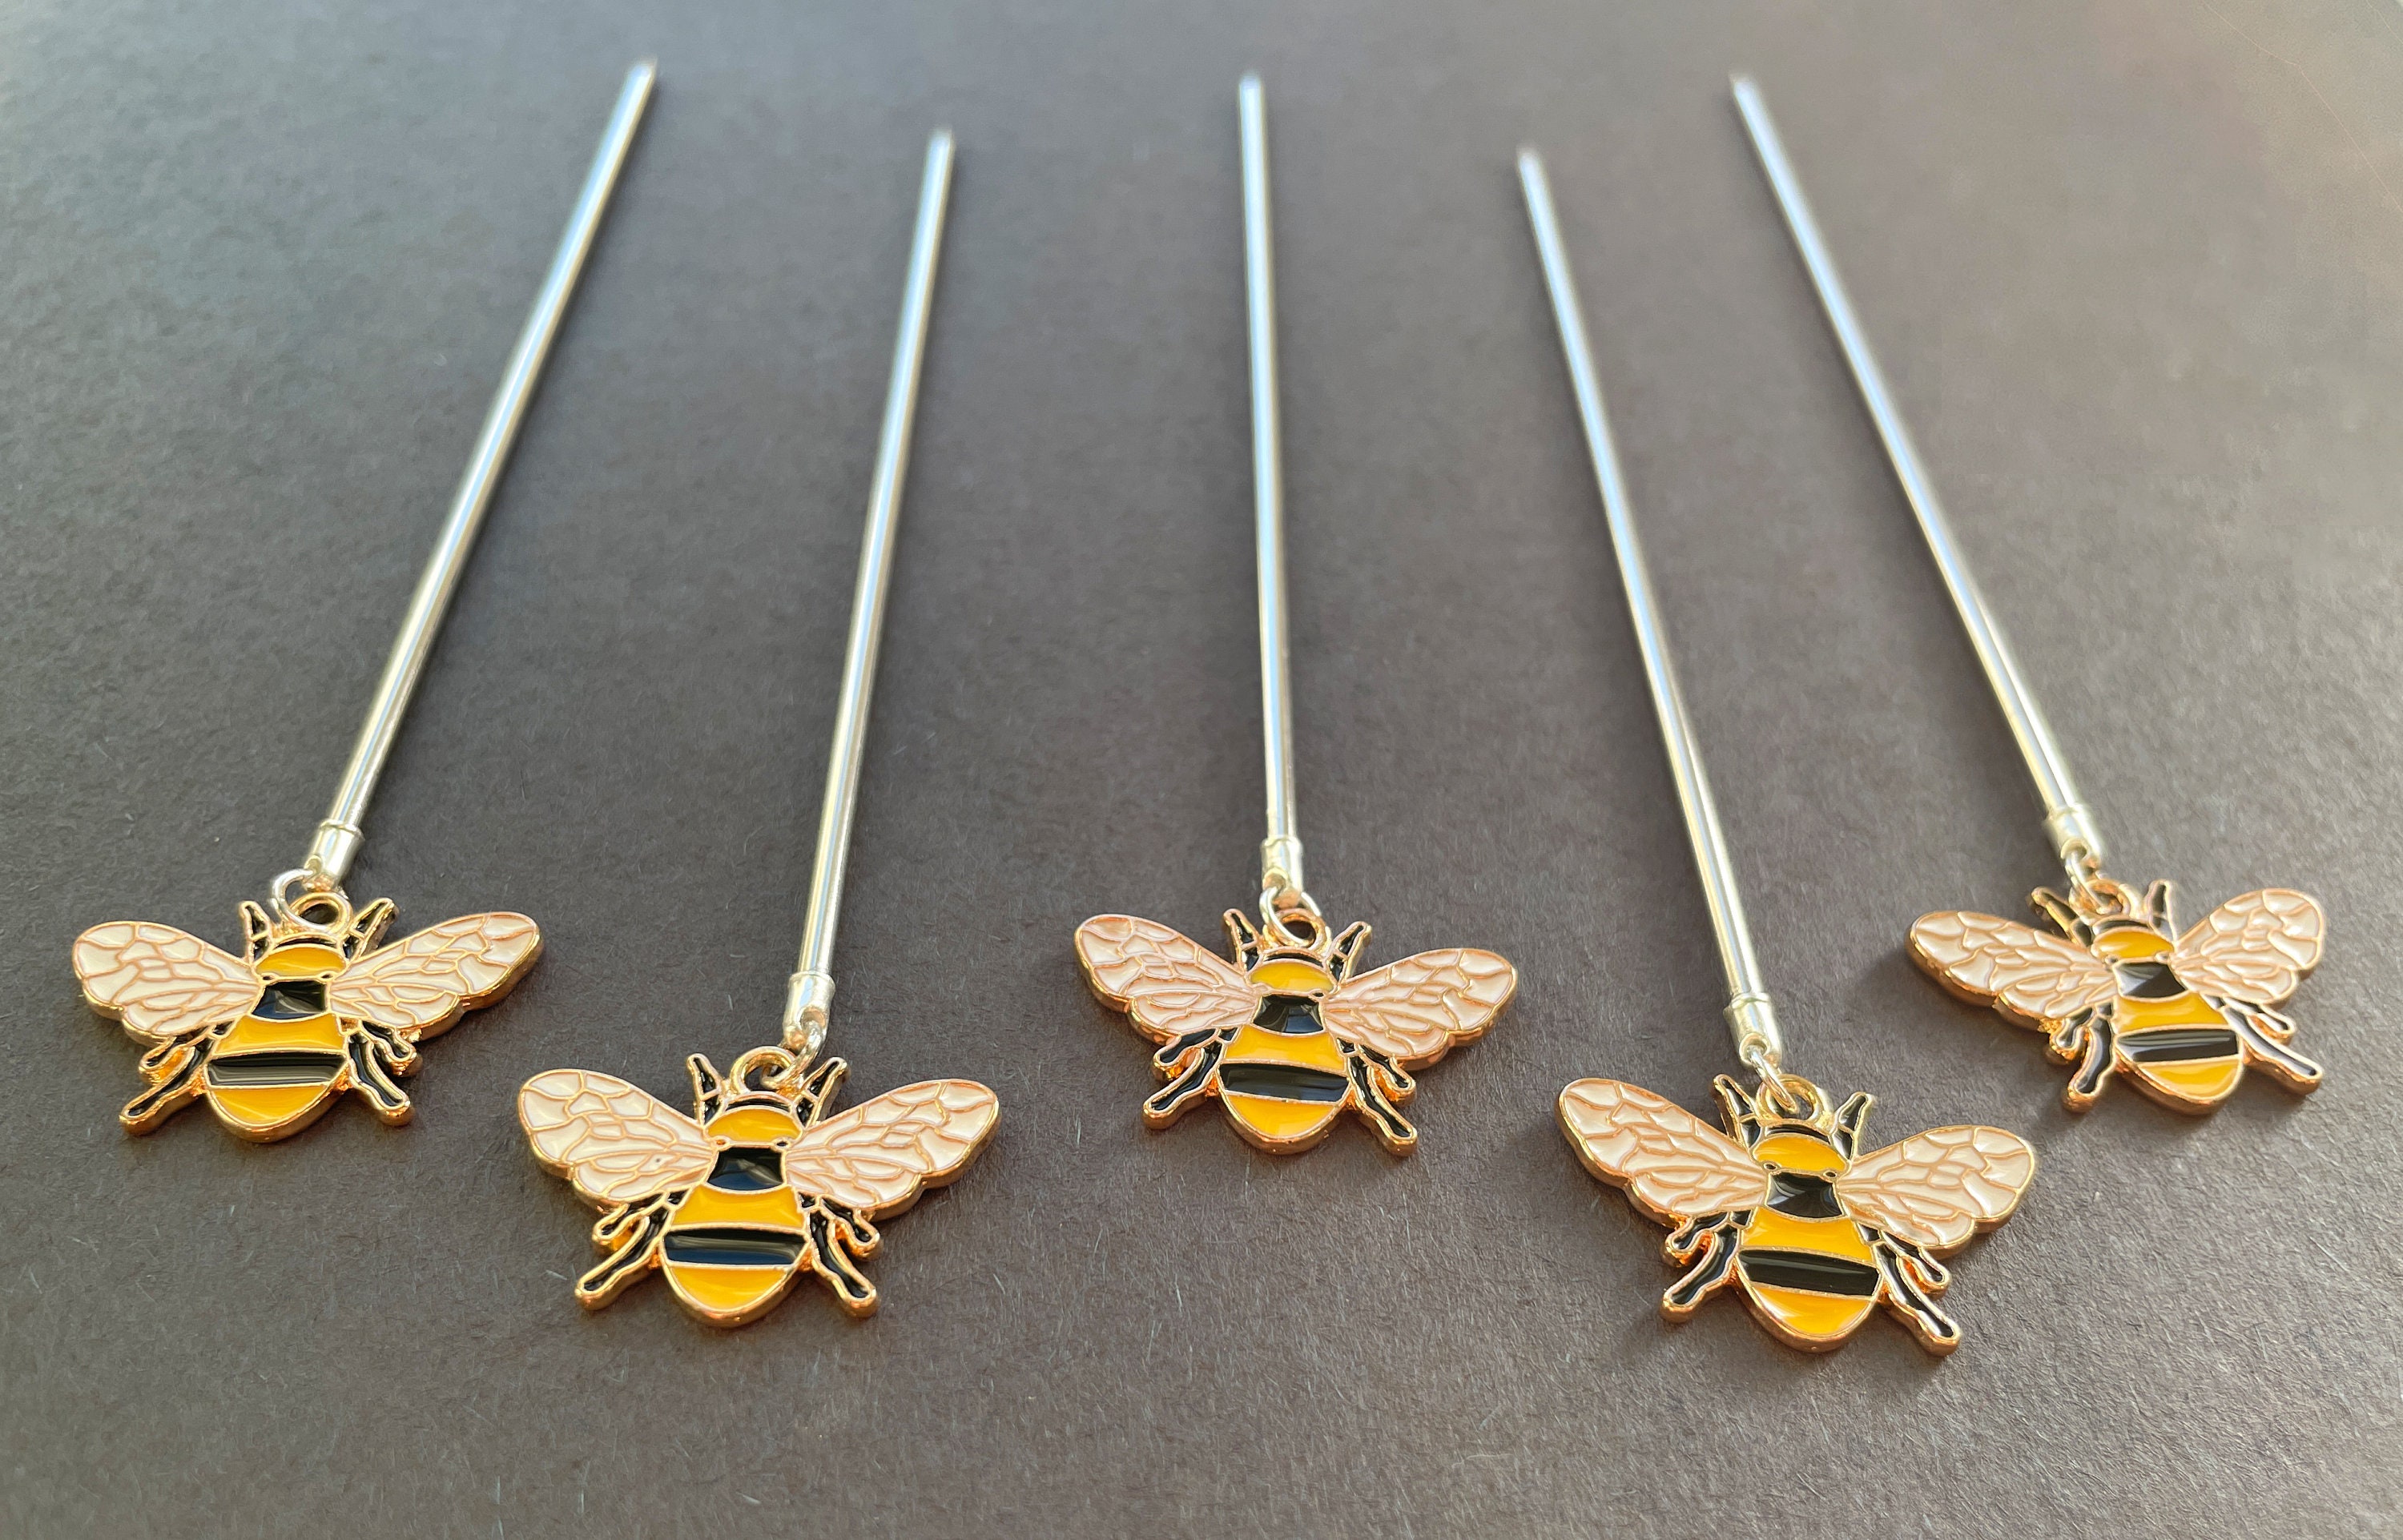 4Pcs Bumble Bee Cocktail Stirrers Swizzle Sticks Stainless Steel 7.5  Coffee Beverage Stir Sticks with Gold Decor Top for Mixing Cocktail, Hot  Cocoa